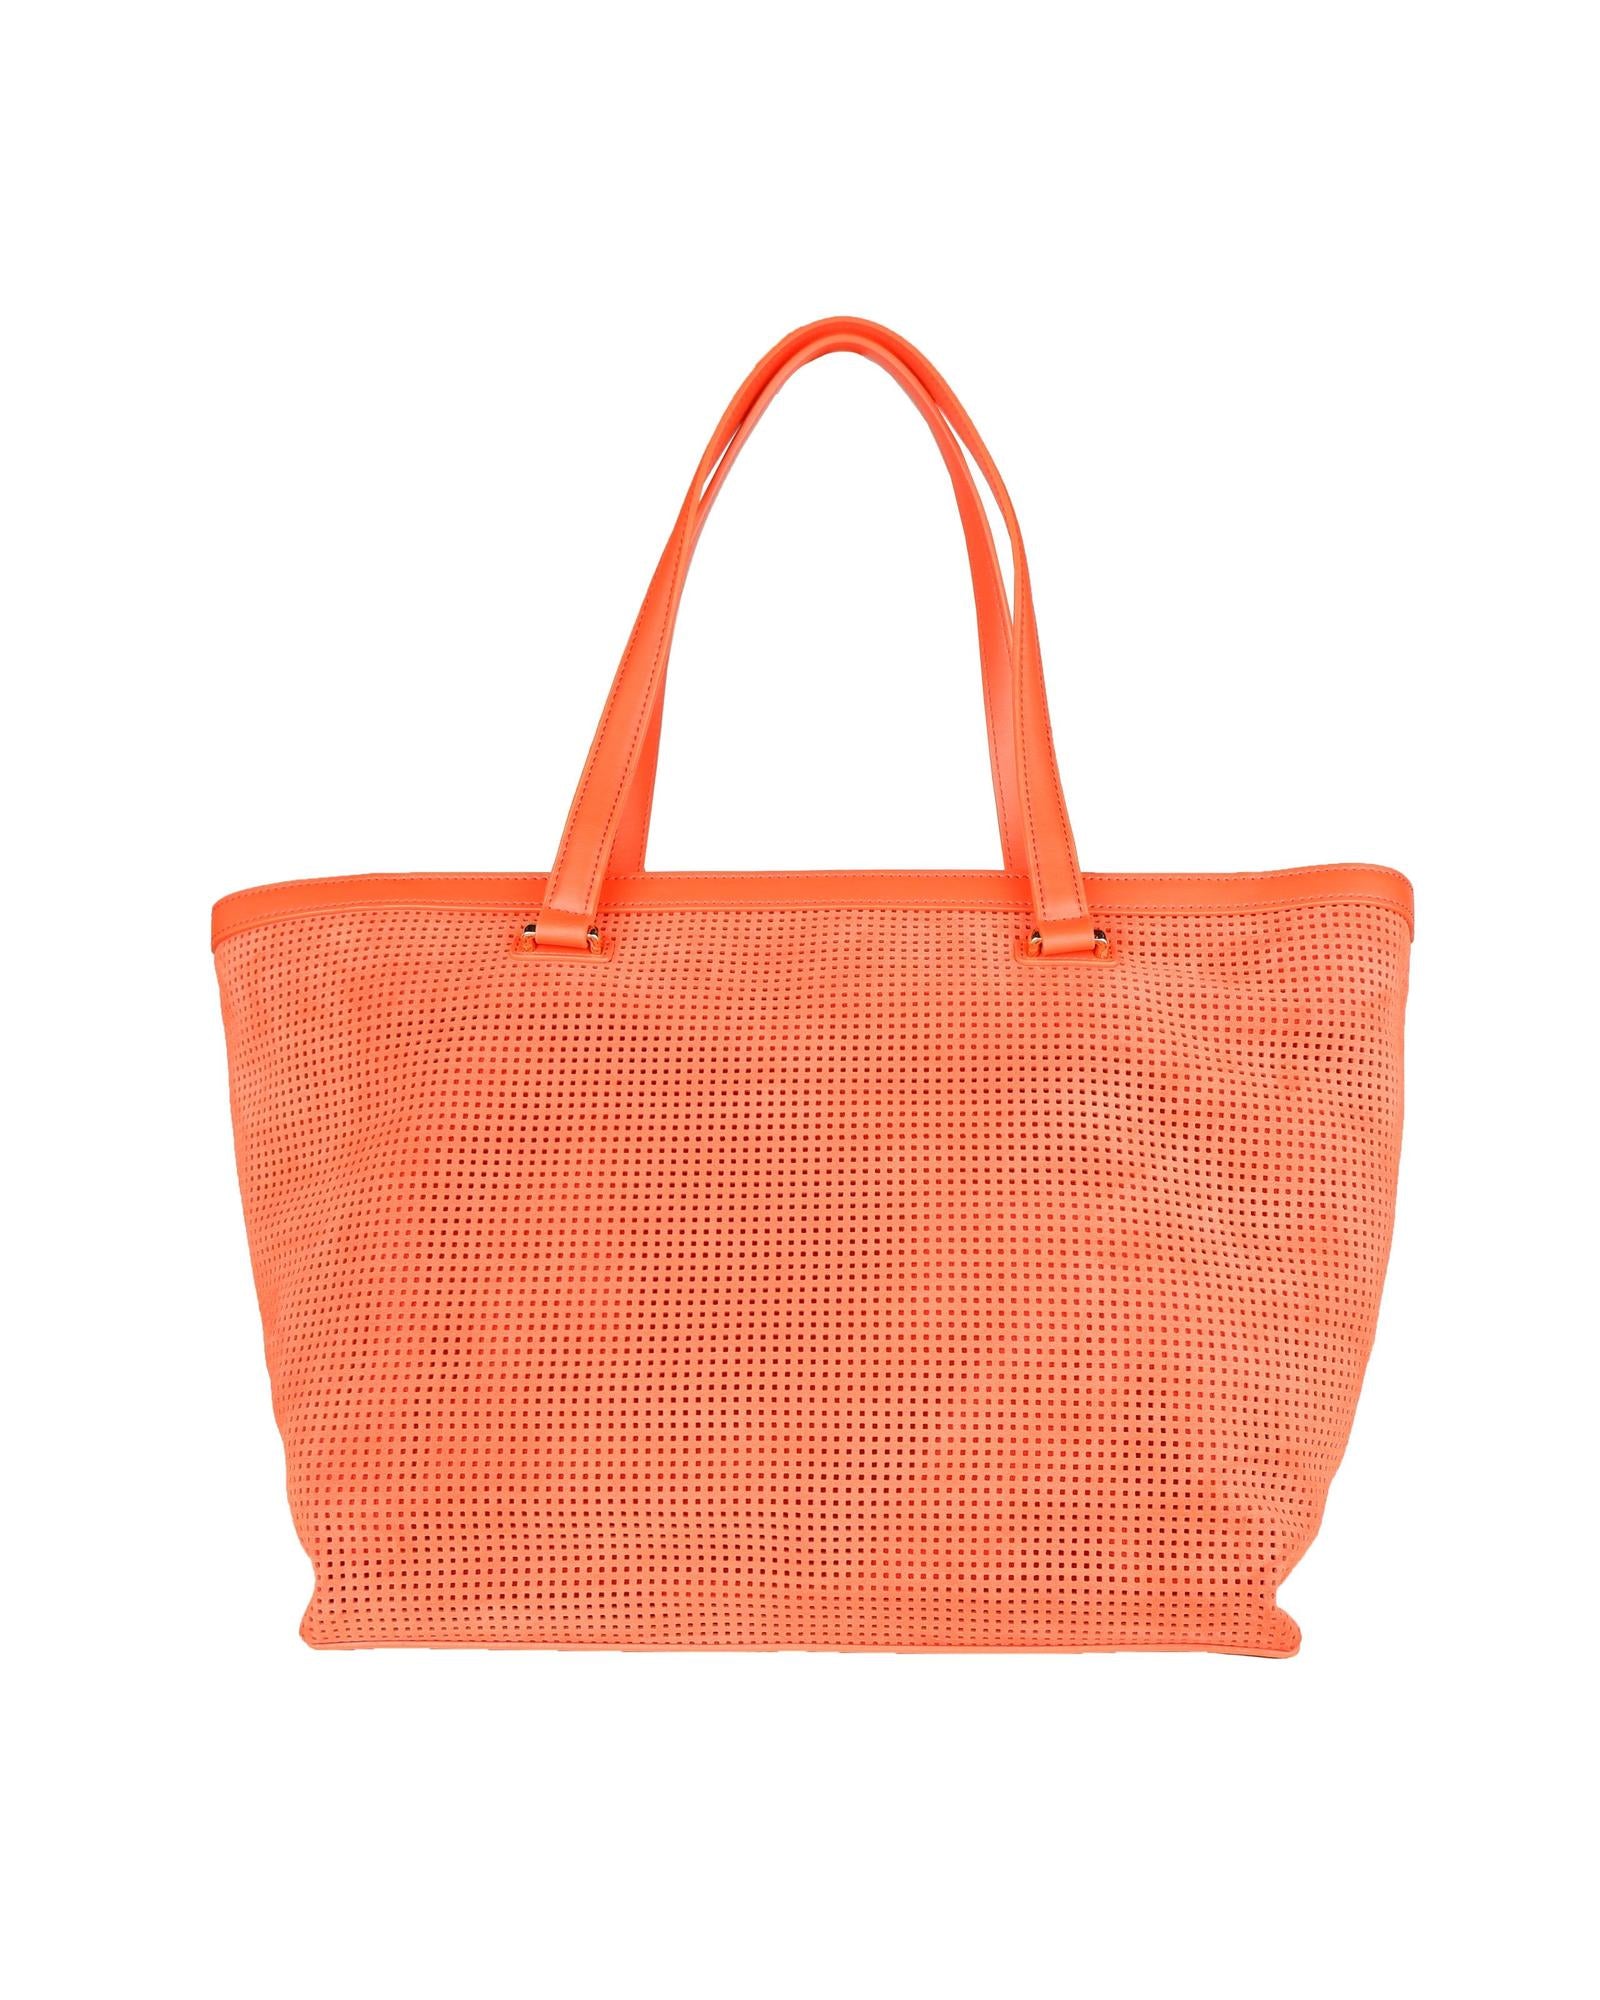 Perforated Squares Texture Handbag with Unique Zipped Compartment One Size Women